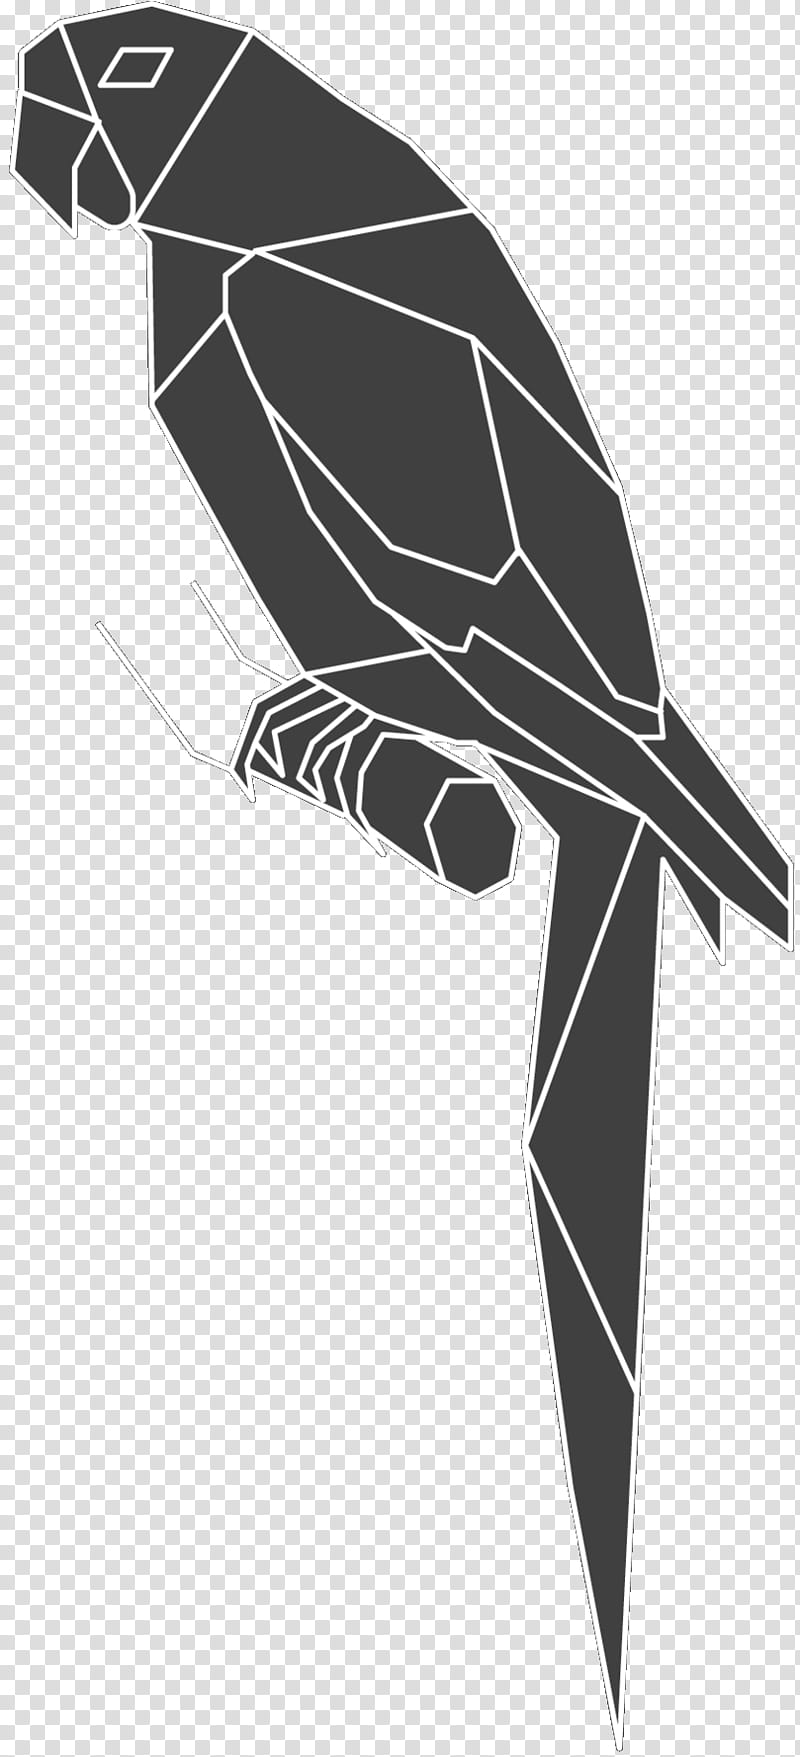 Bird Parrot, Black White M, Beak, Bird Of Prey, Angle, Feather, Black M, Wing transparent background PNG clipart